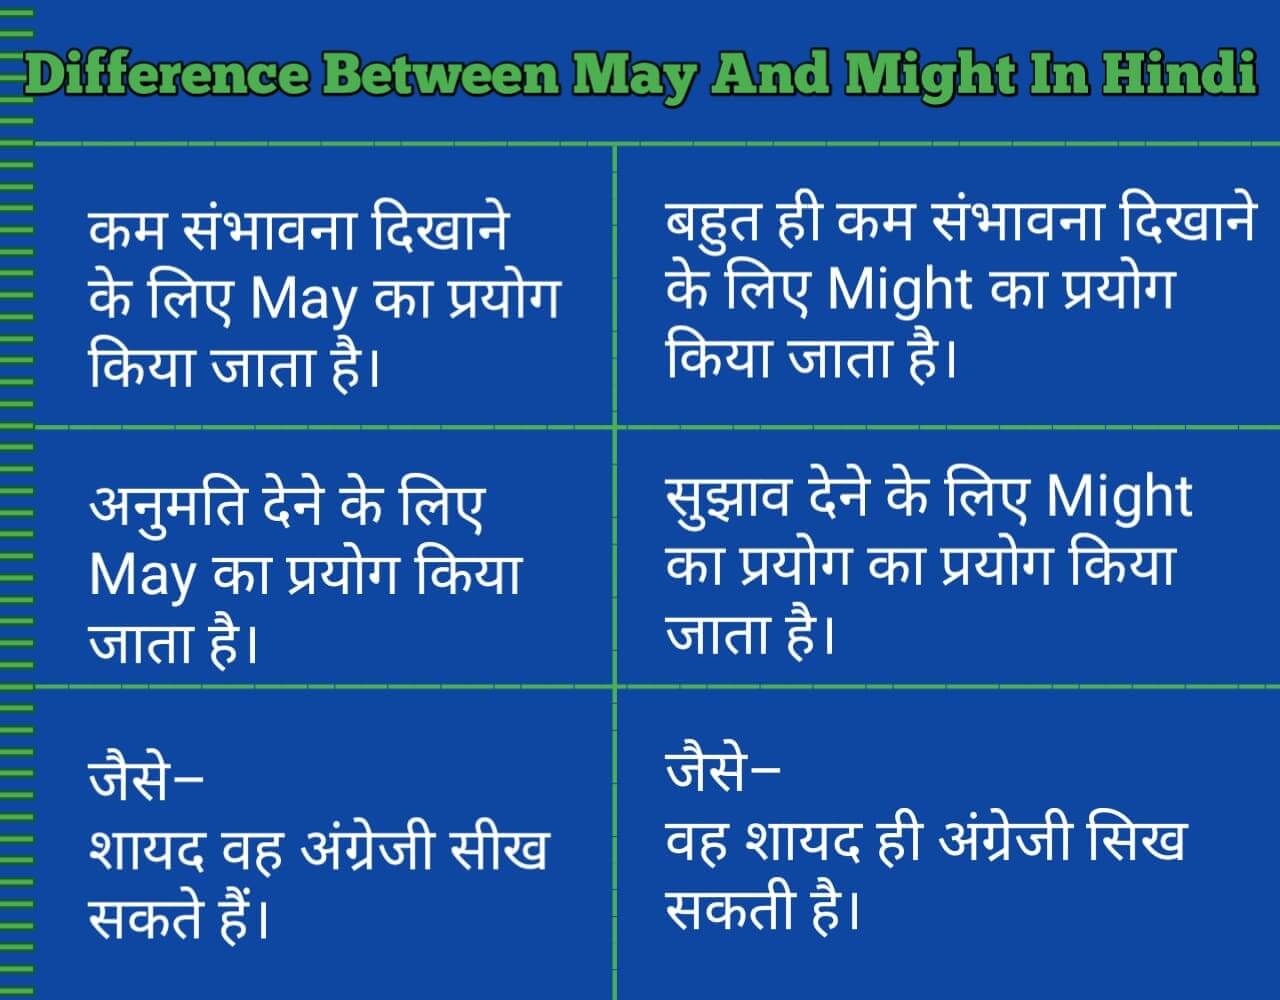 Difference Between May And Might In Hindi